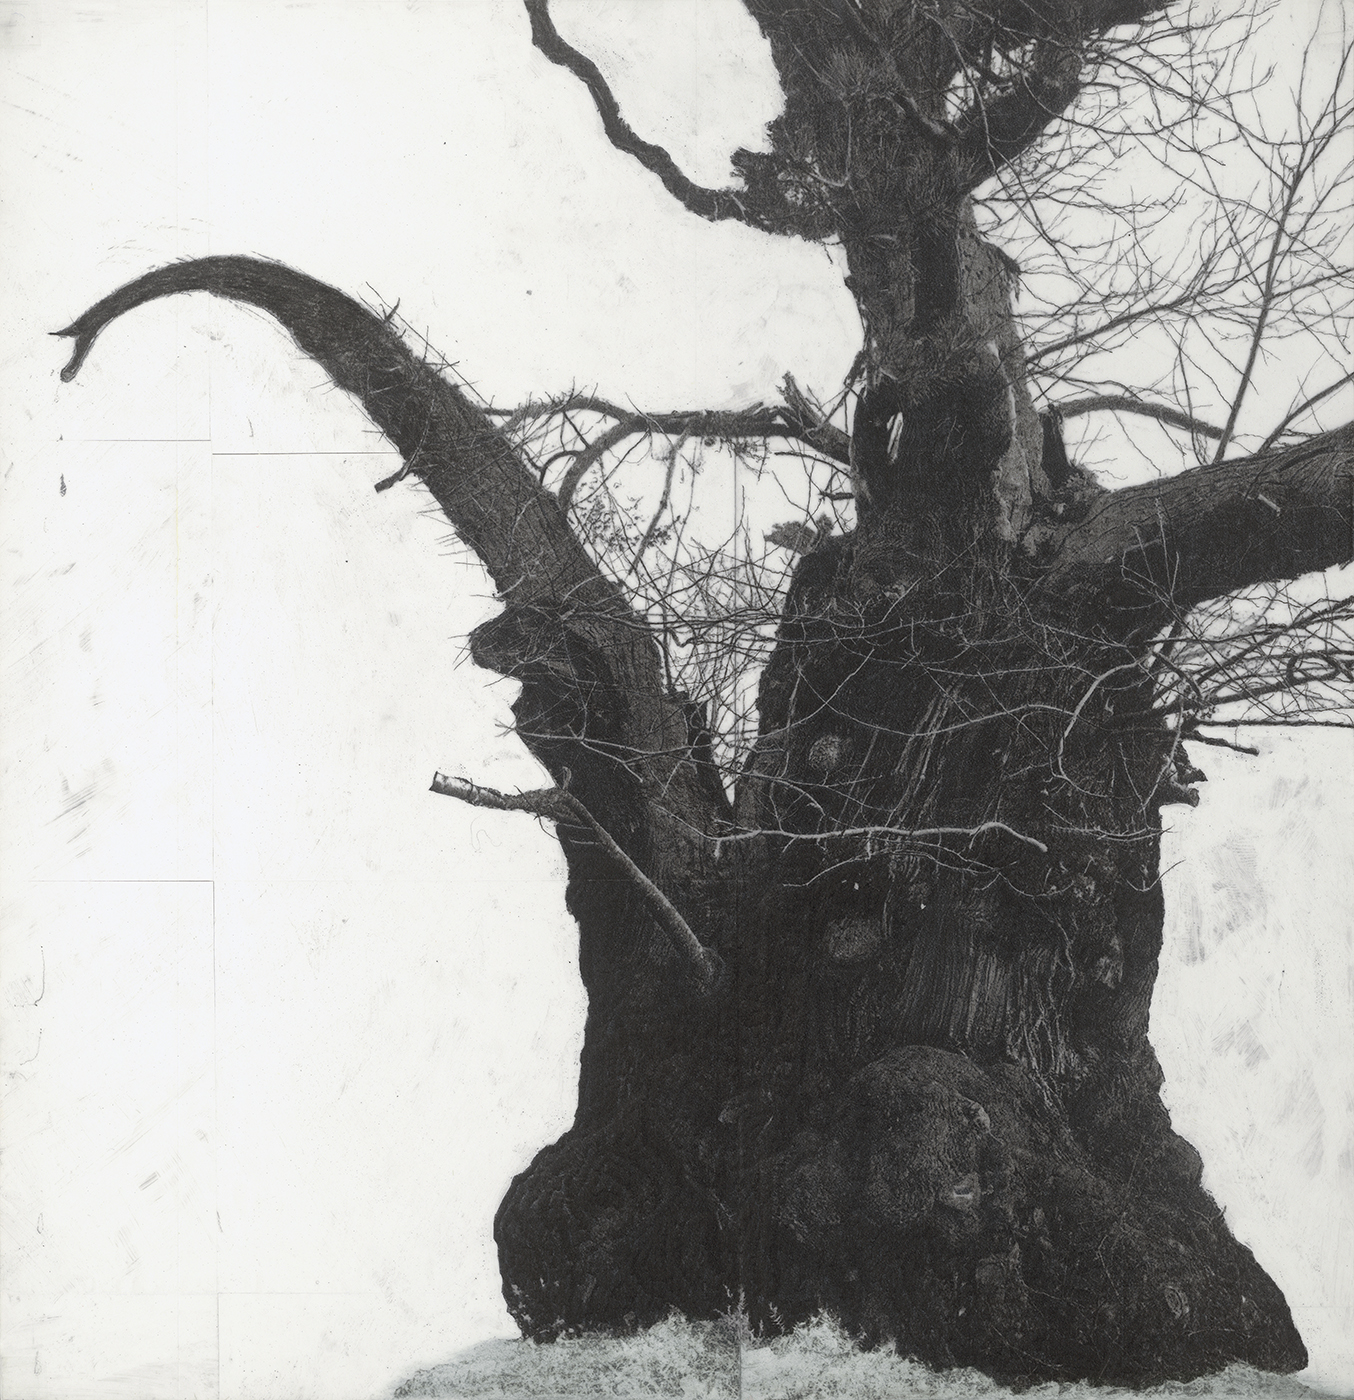 Patrick Van Caeckenbergh - Drawing of old trees on wintry days during 2007-2014 _C, 2007-2014